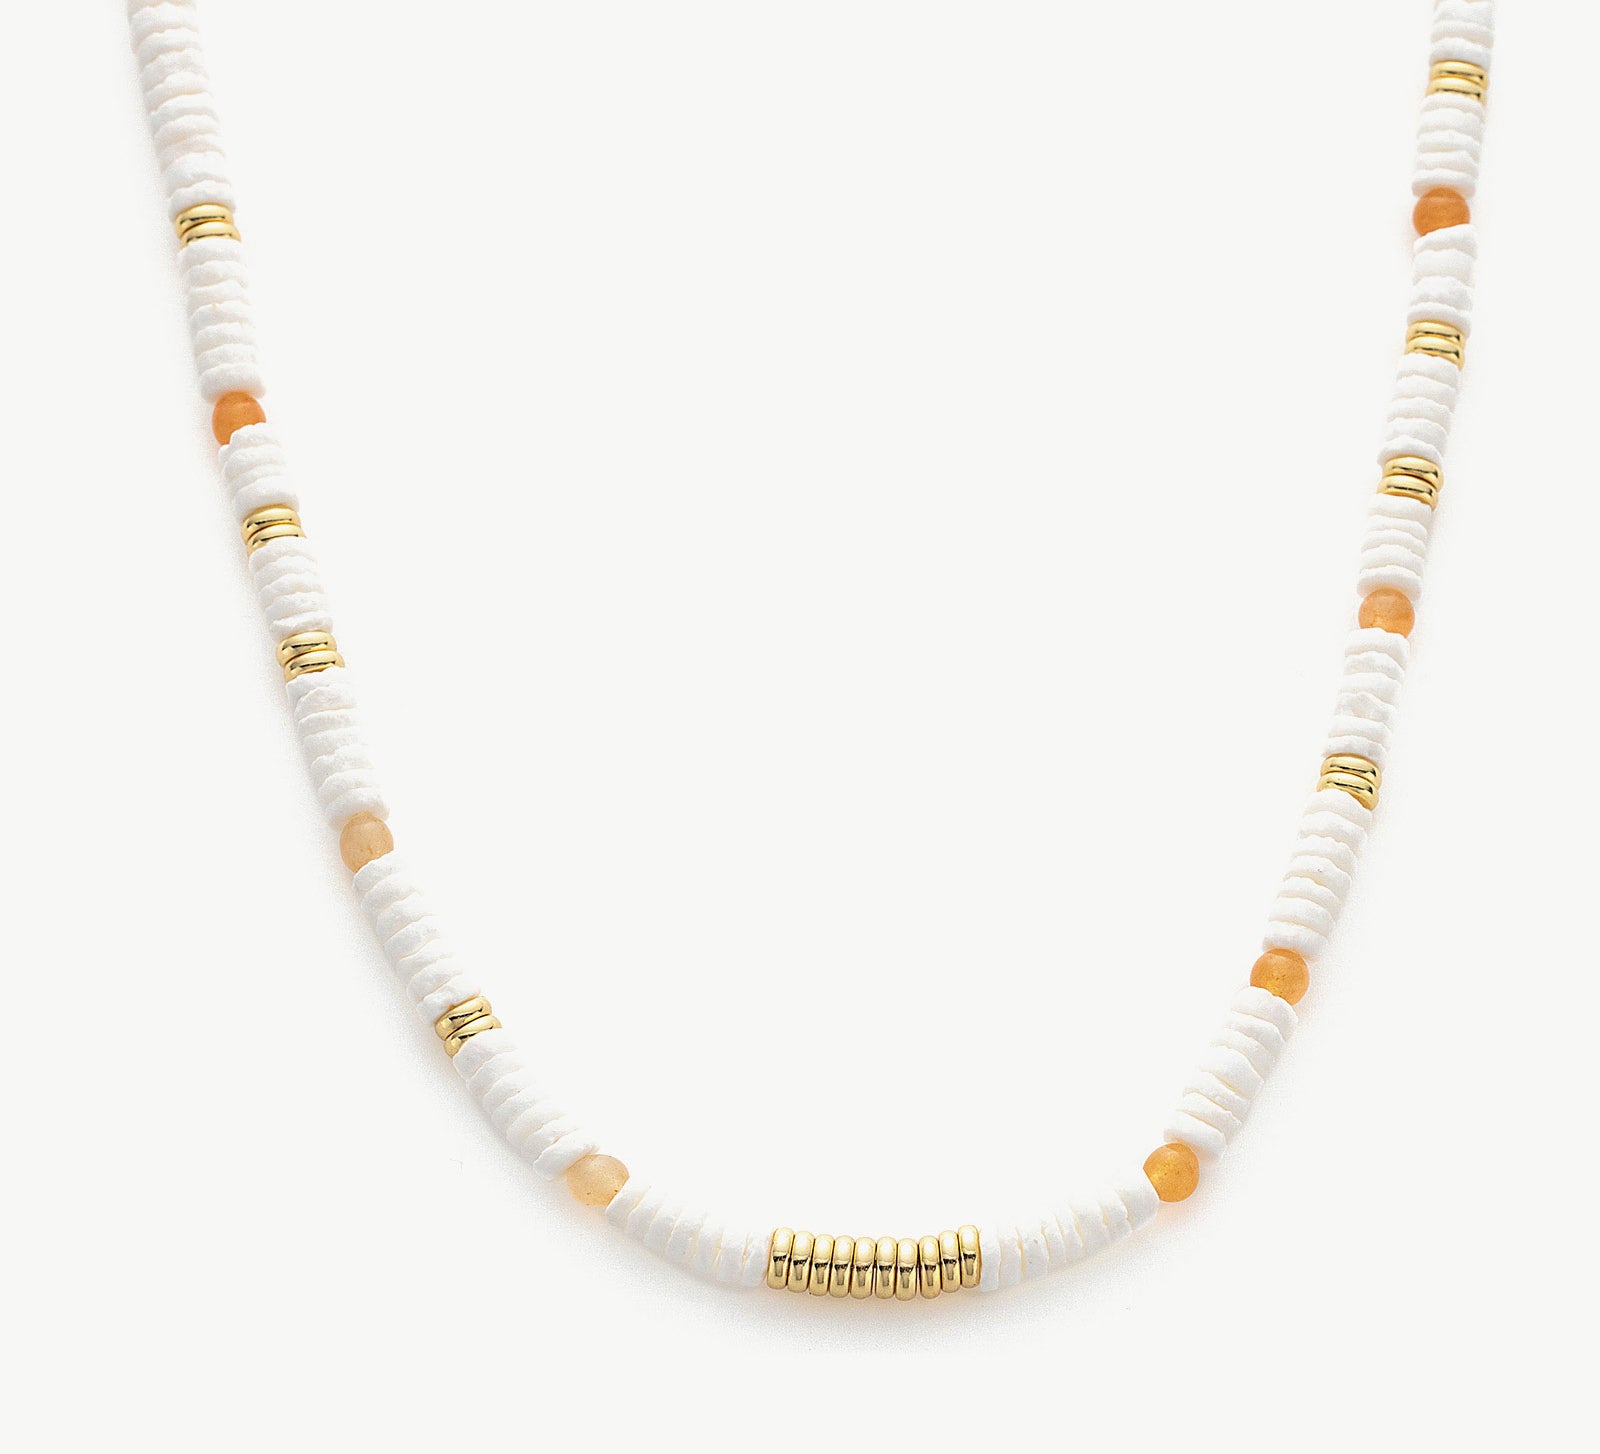  Beaded Stack Necklace, a boho-inspired piece featuring multiple strands of colorful beads stacked together, creating a vibrant and stylish accessory for a touch of eclectic elegance